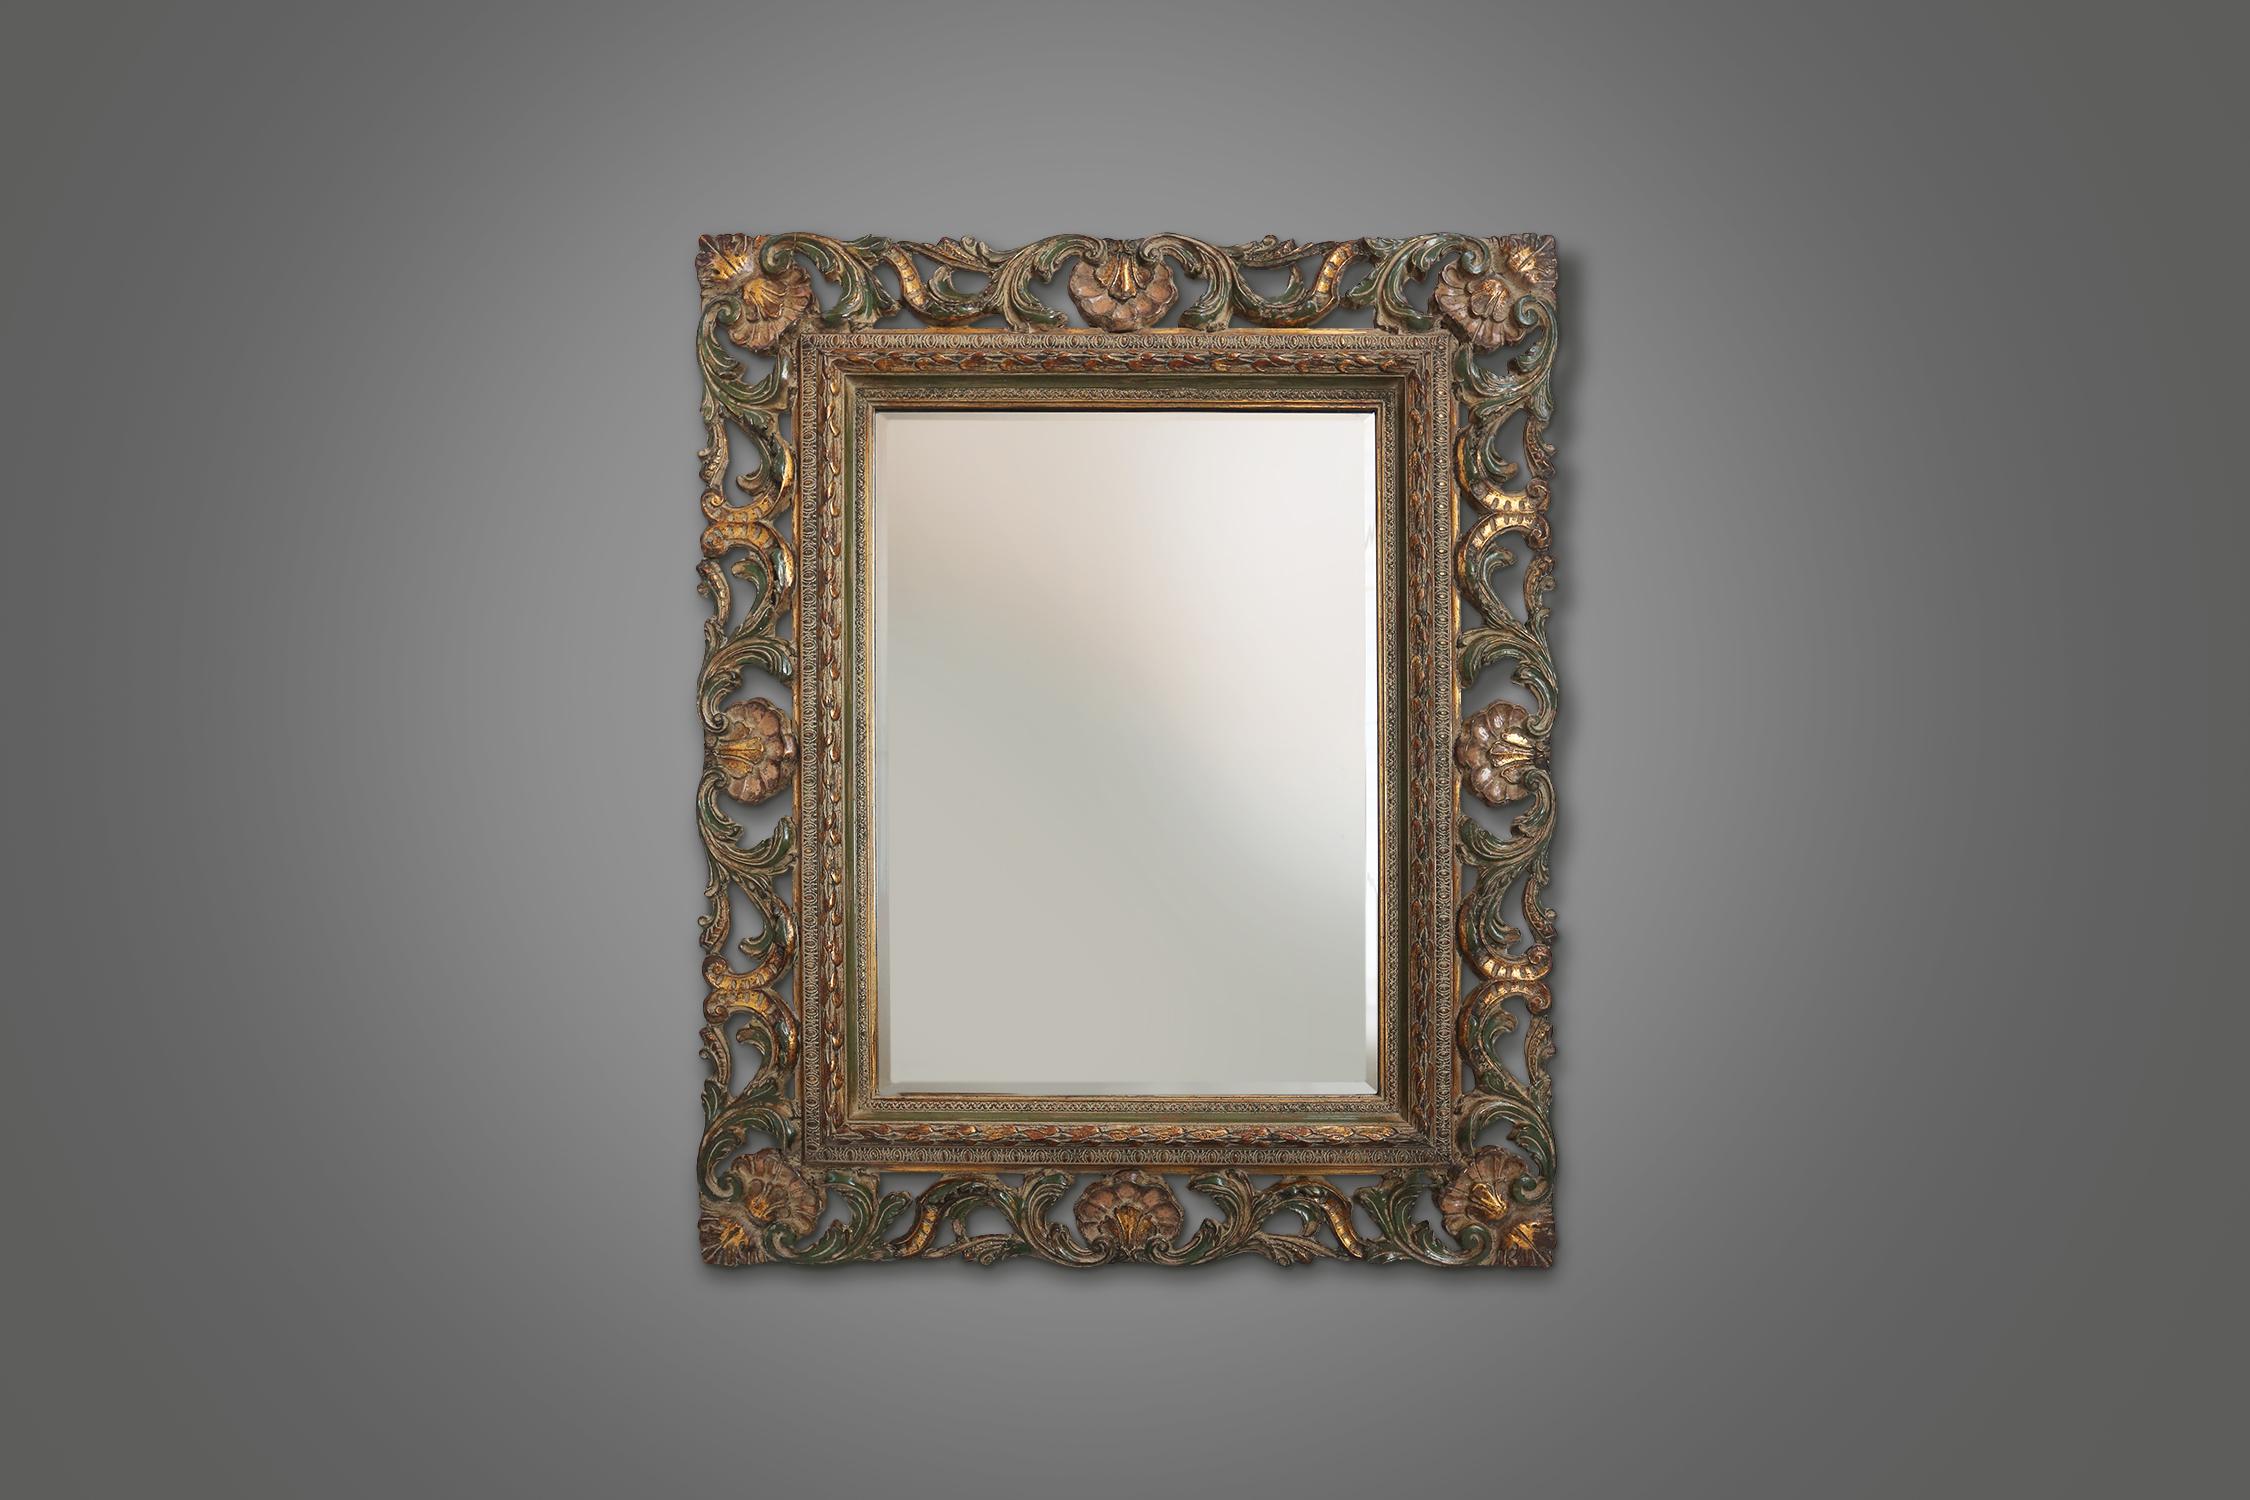 This mirror is more than an ordinary mirror. It is a masterpiece of craftsmanship and elegance. The mirror has a rectangular shape with an opulent, made in resin. The frame is decorated with intricate designs and patterns that reflect the style and